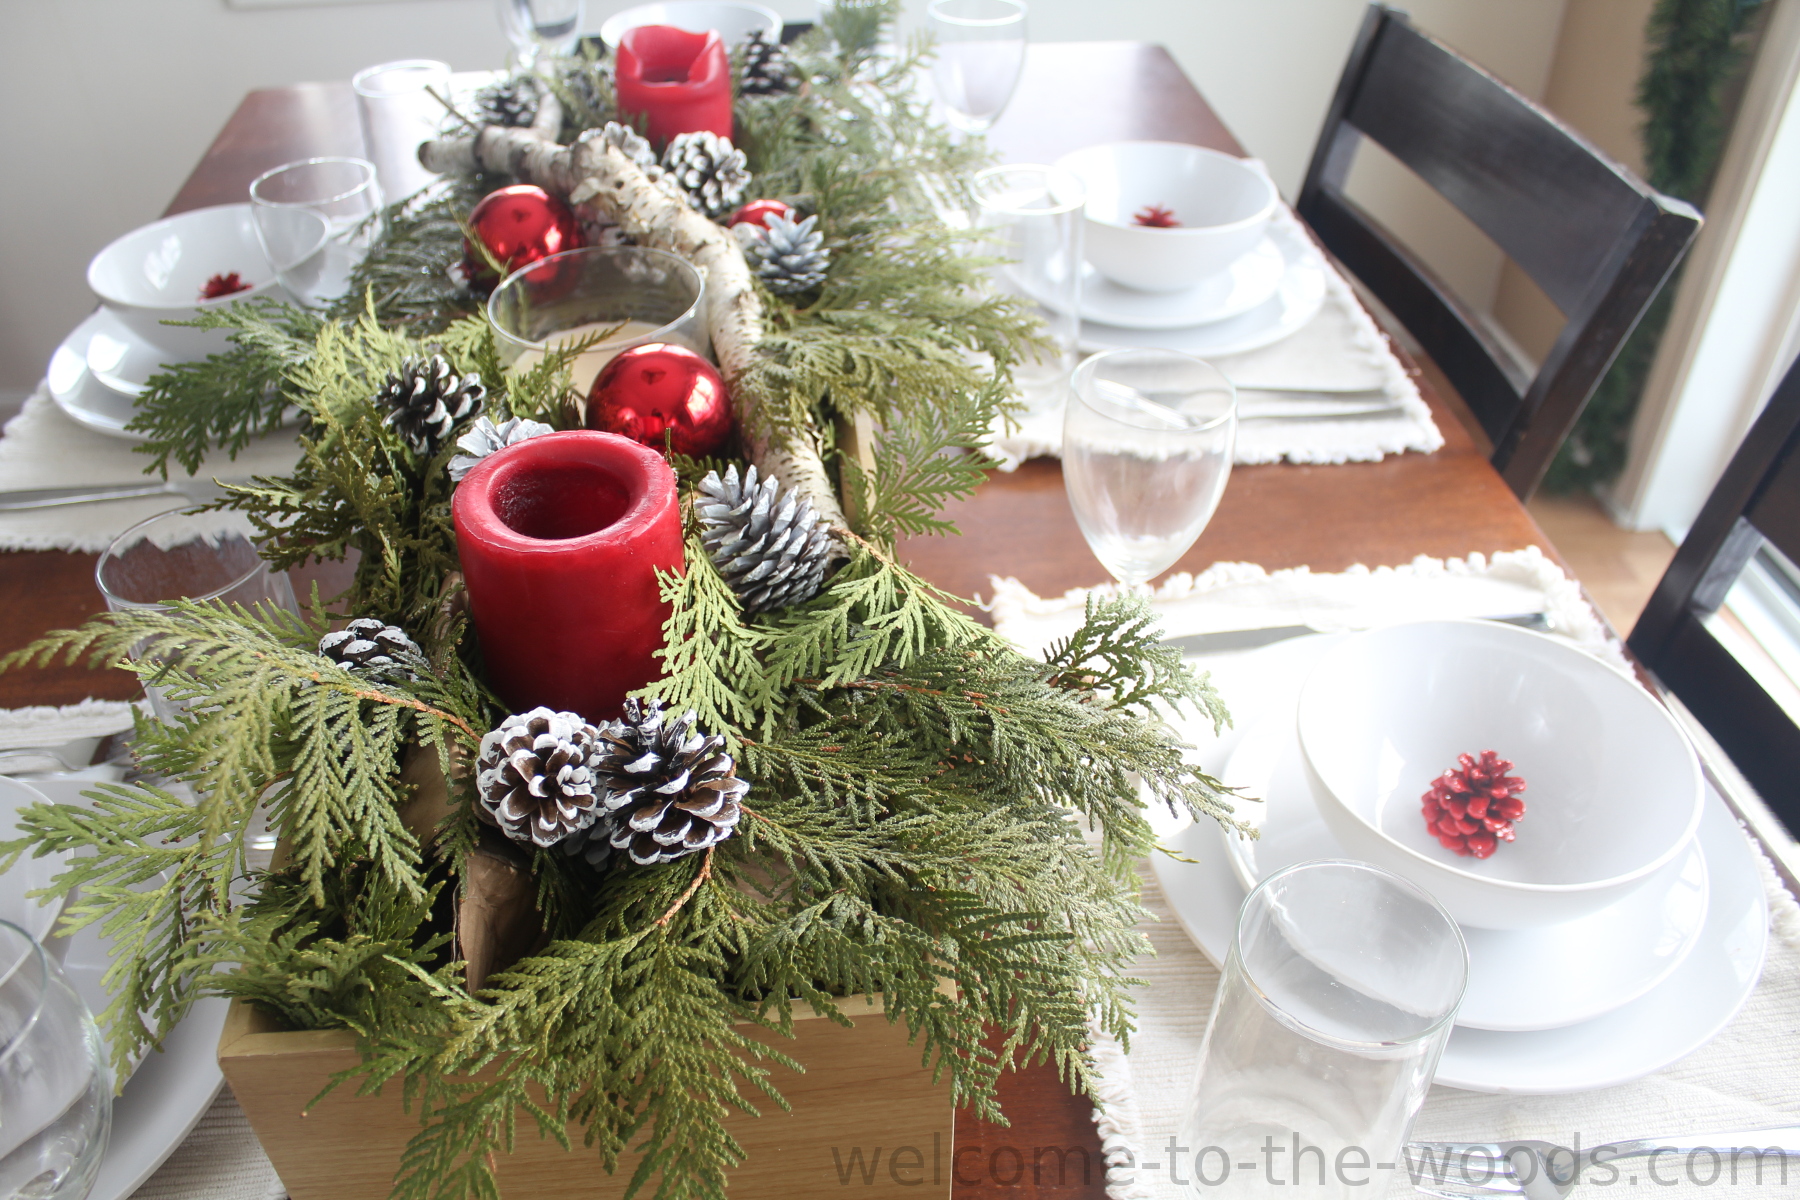 Simple Woodland and Pine Cone Christmas Table Setting - Home with Holliday